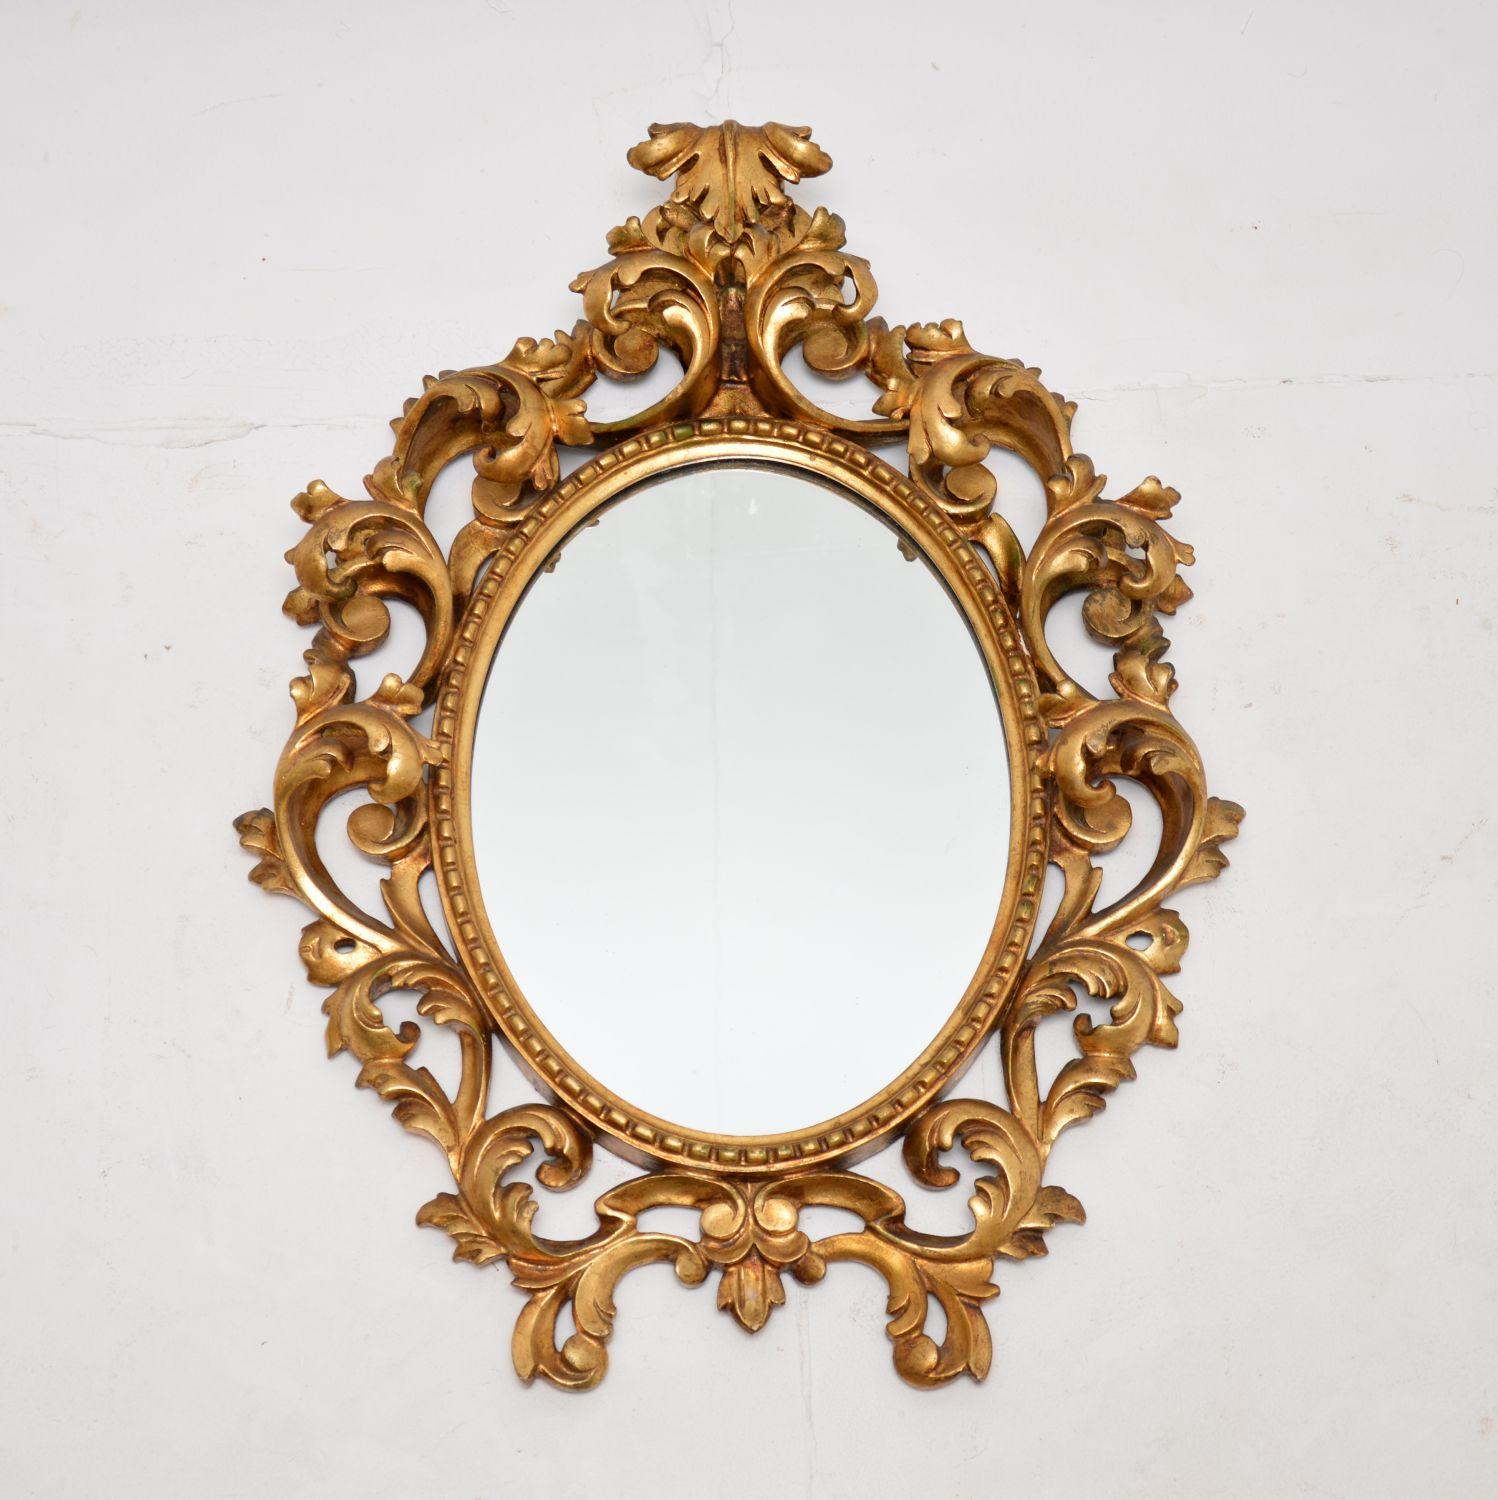 A fabulous gilt wood mirror in the antique French Rococo style. This dates from around the 1930’s period and it is of extremely fine quality.

The carving on the gilt wood frame is deep and intricate, it is most impressive. The gilt wood is in great